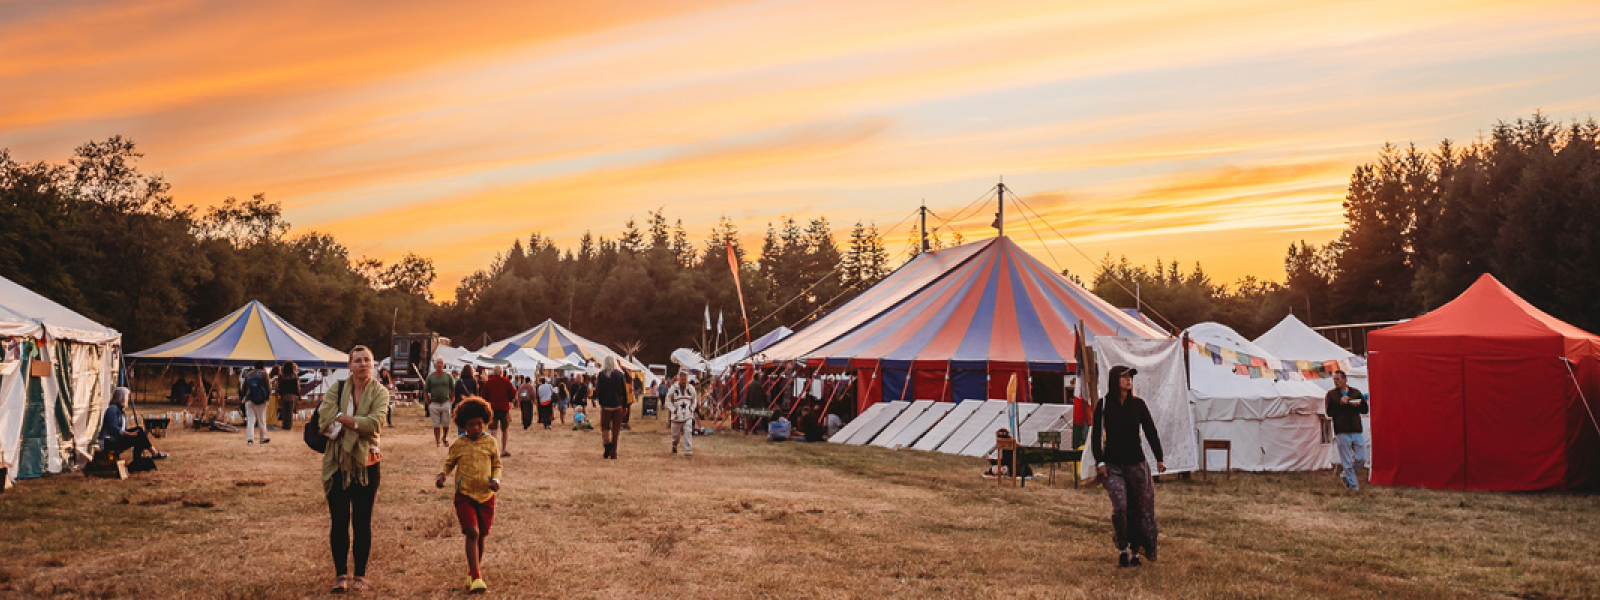 Buddhafield tents and people by sunrise